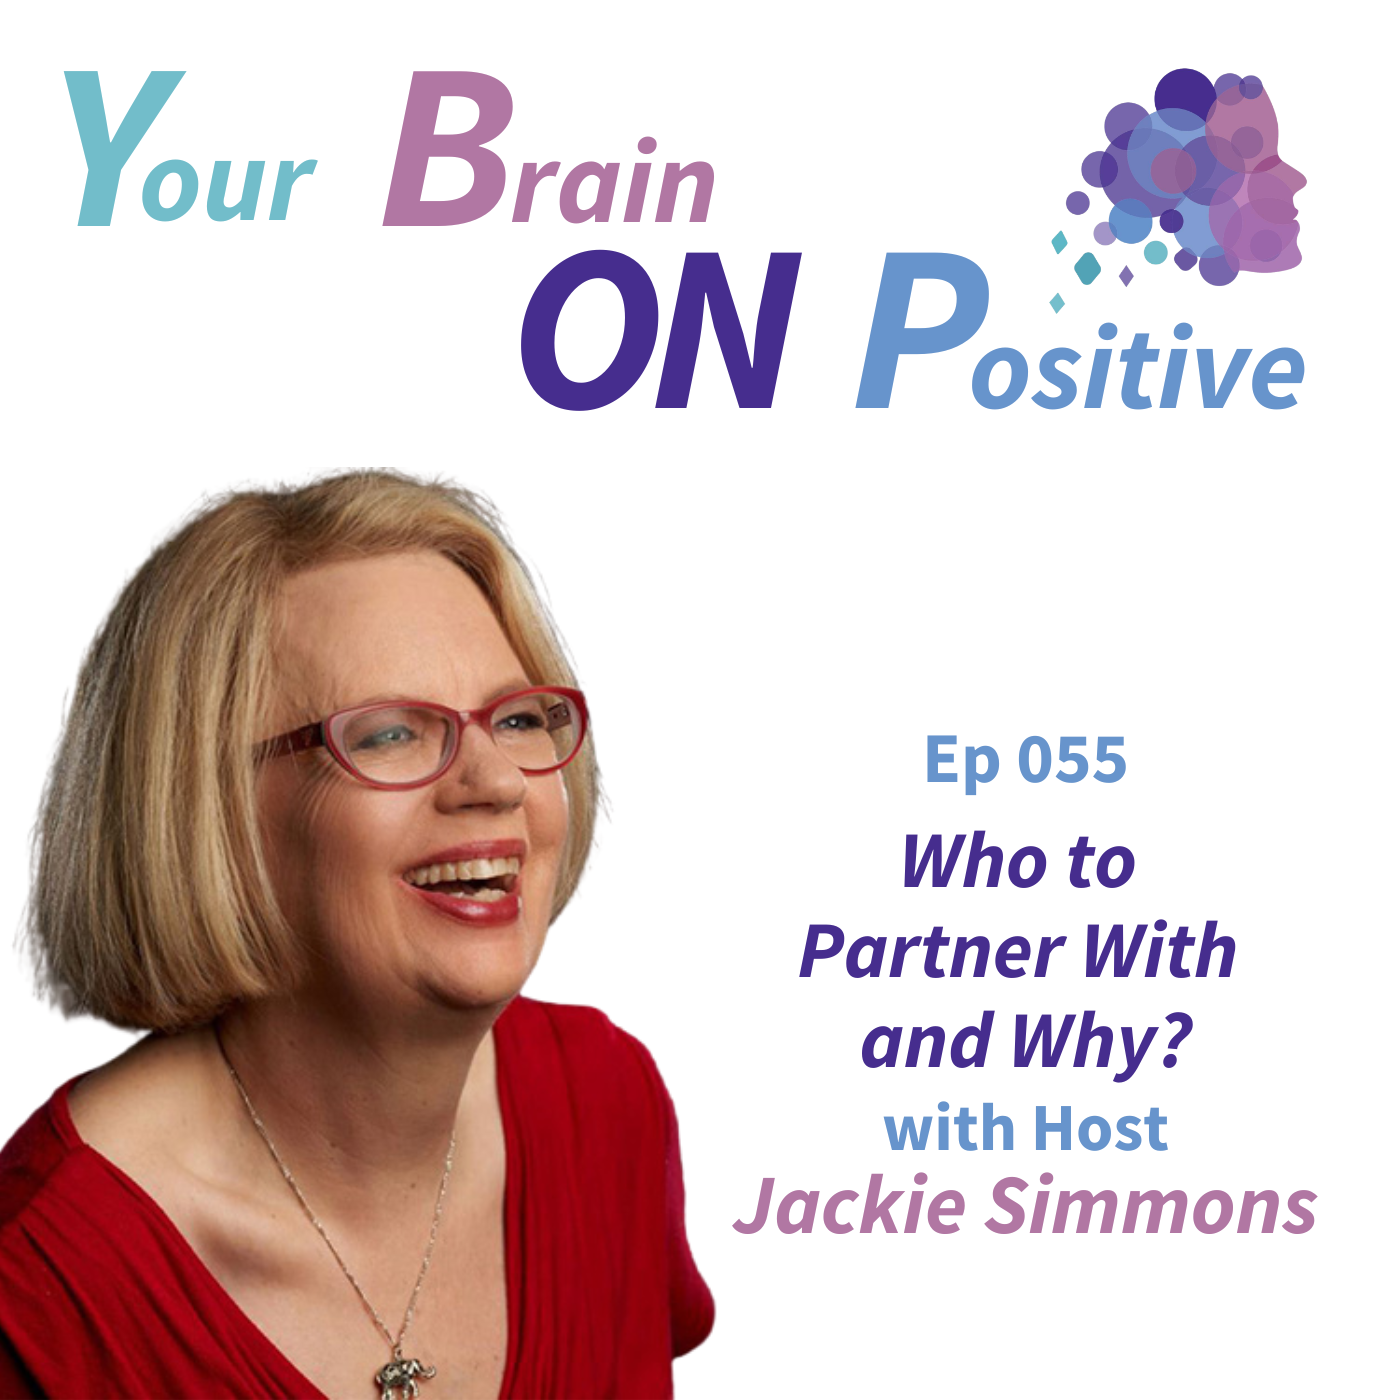 Who to Partner With and Why? - Jackie Simmons